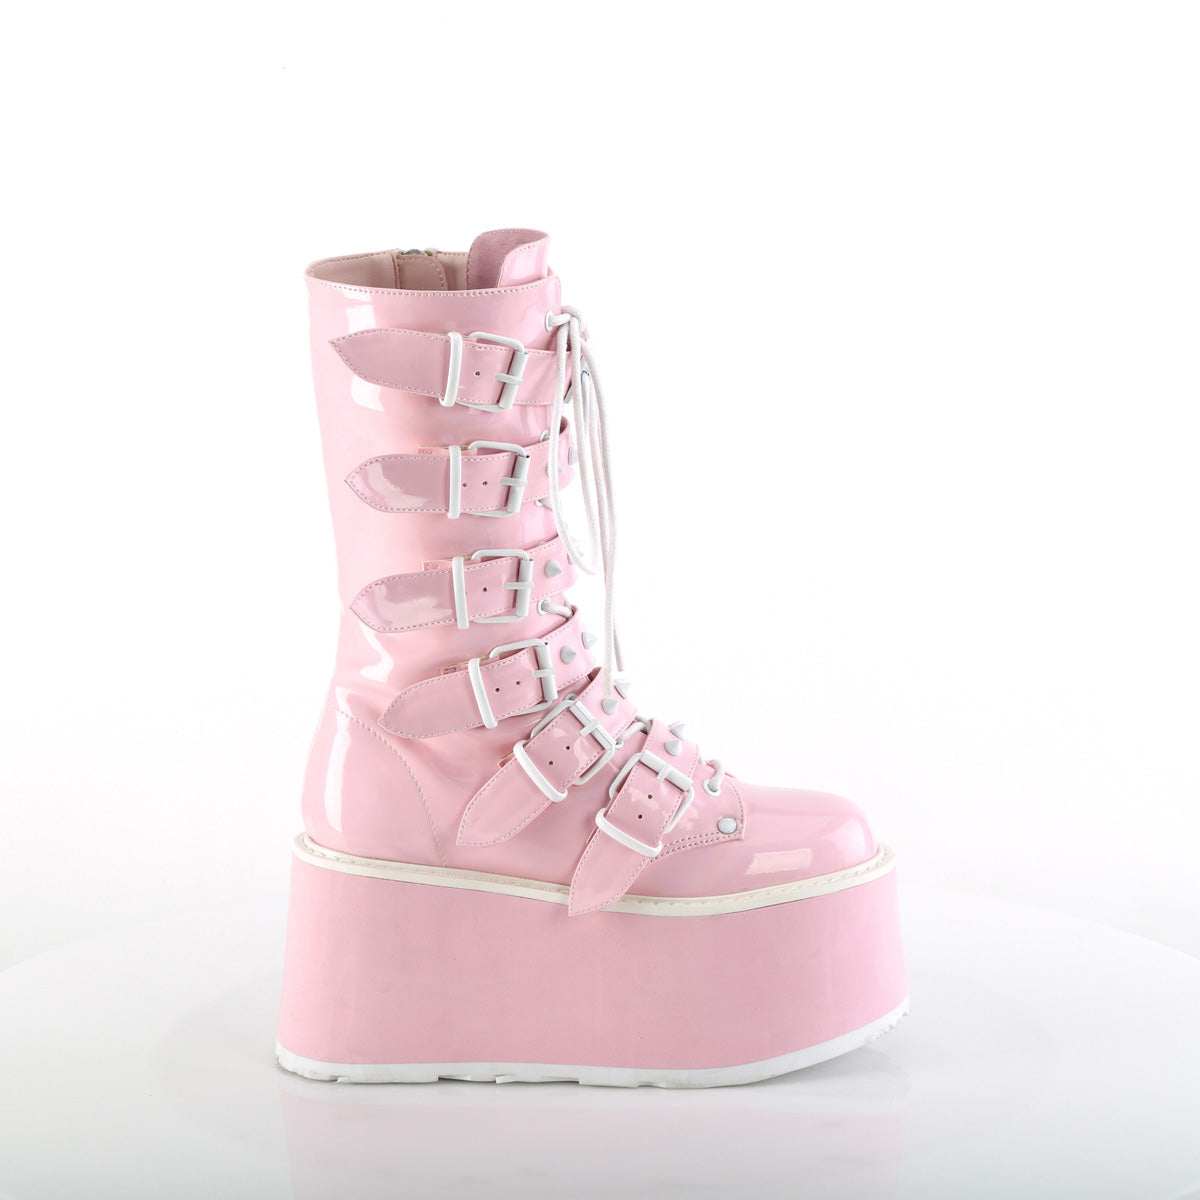 DAMNED-225 Baby Pink Holo Mid-Calf Boots